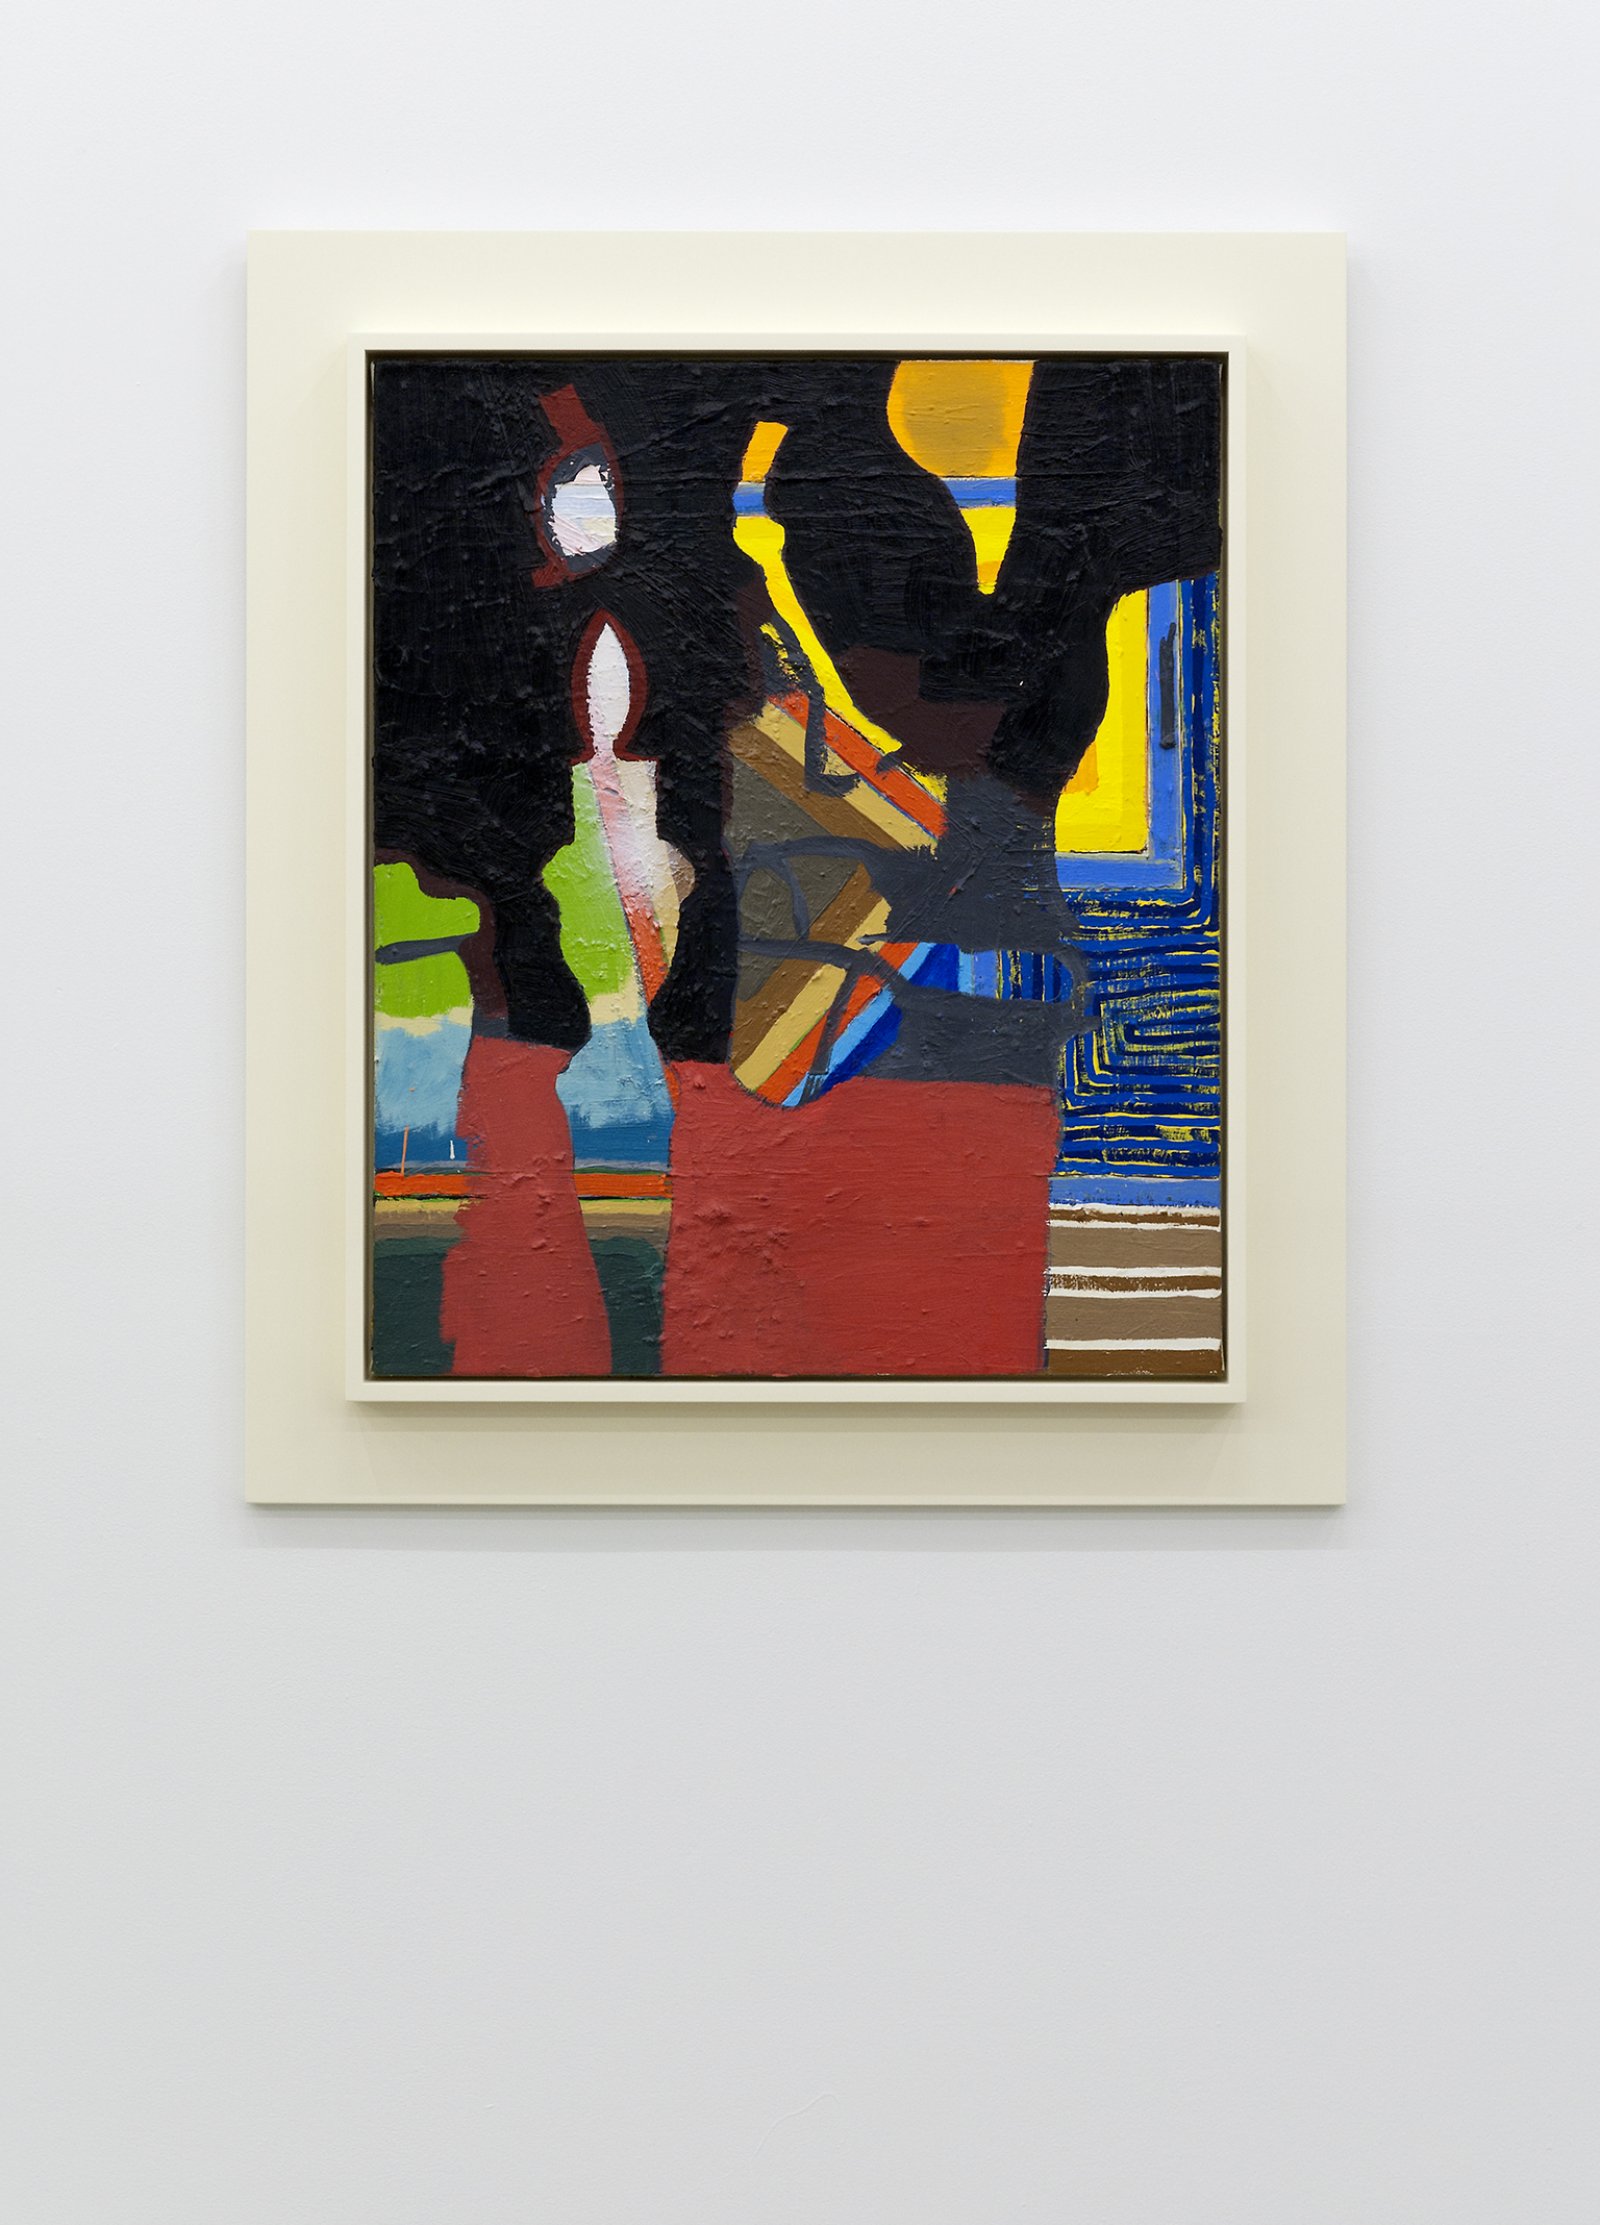 ​Damian Moppett, Candle #2, 2010, oil and spray enamel on canvas and wood frame, 36 x 32 in. (90 x 80 cm) by Damian Moppett